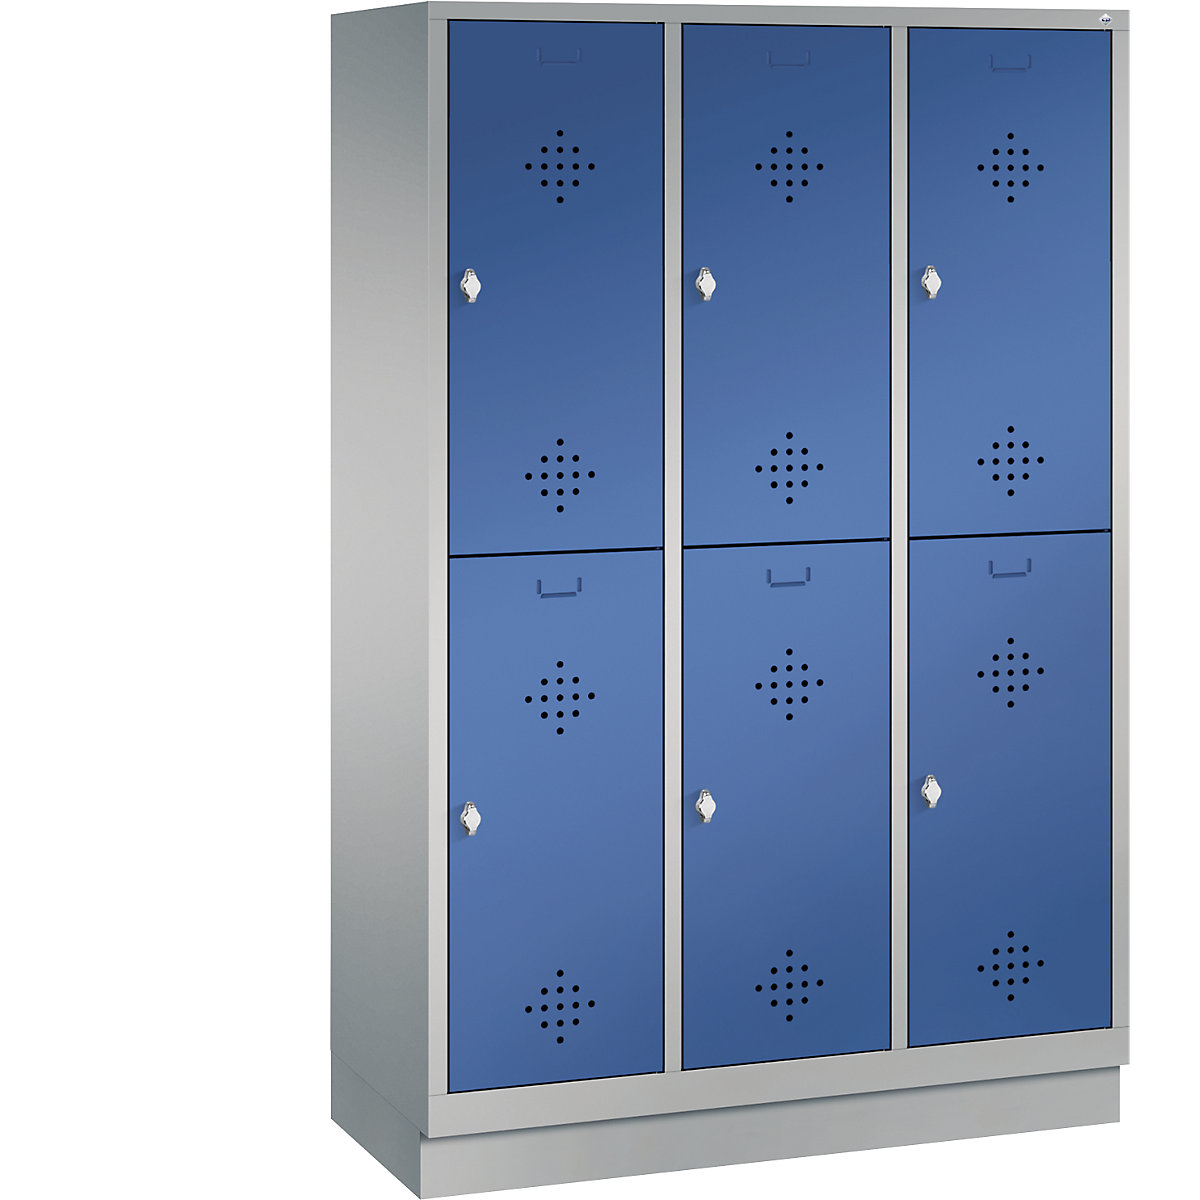 CLASSIC cloakroom locker with plinth, double tier – C+P, 3 compartments, 2 shelf compartments each, compartment width 400 mm, white aluminium / gentian blue-10